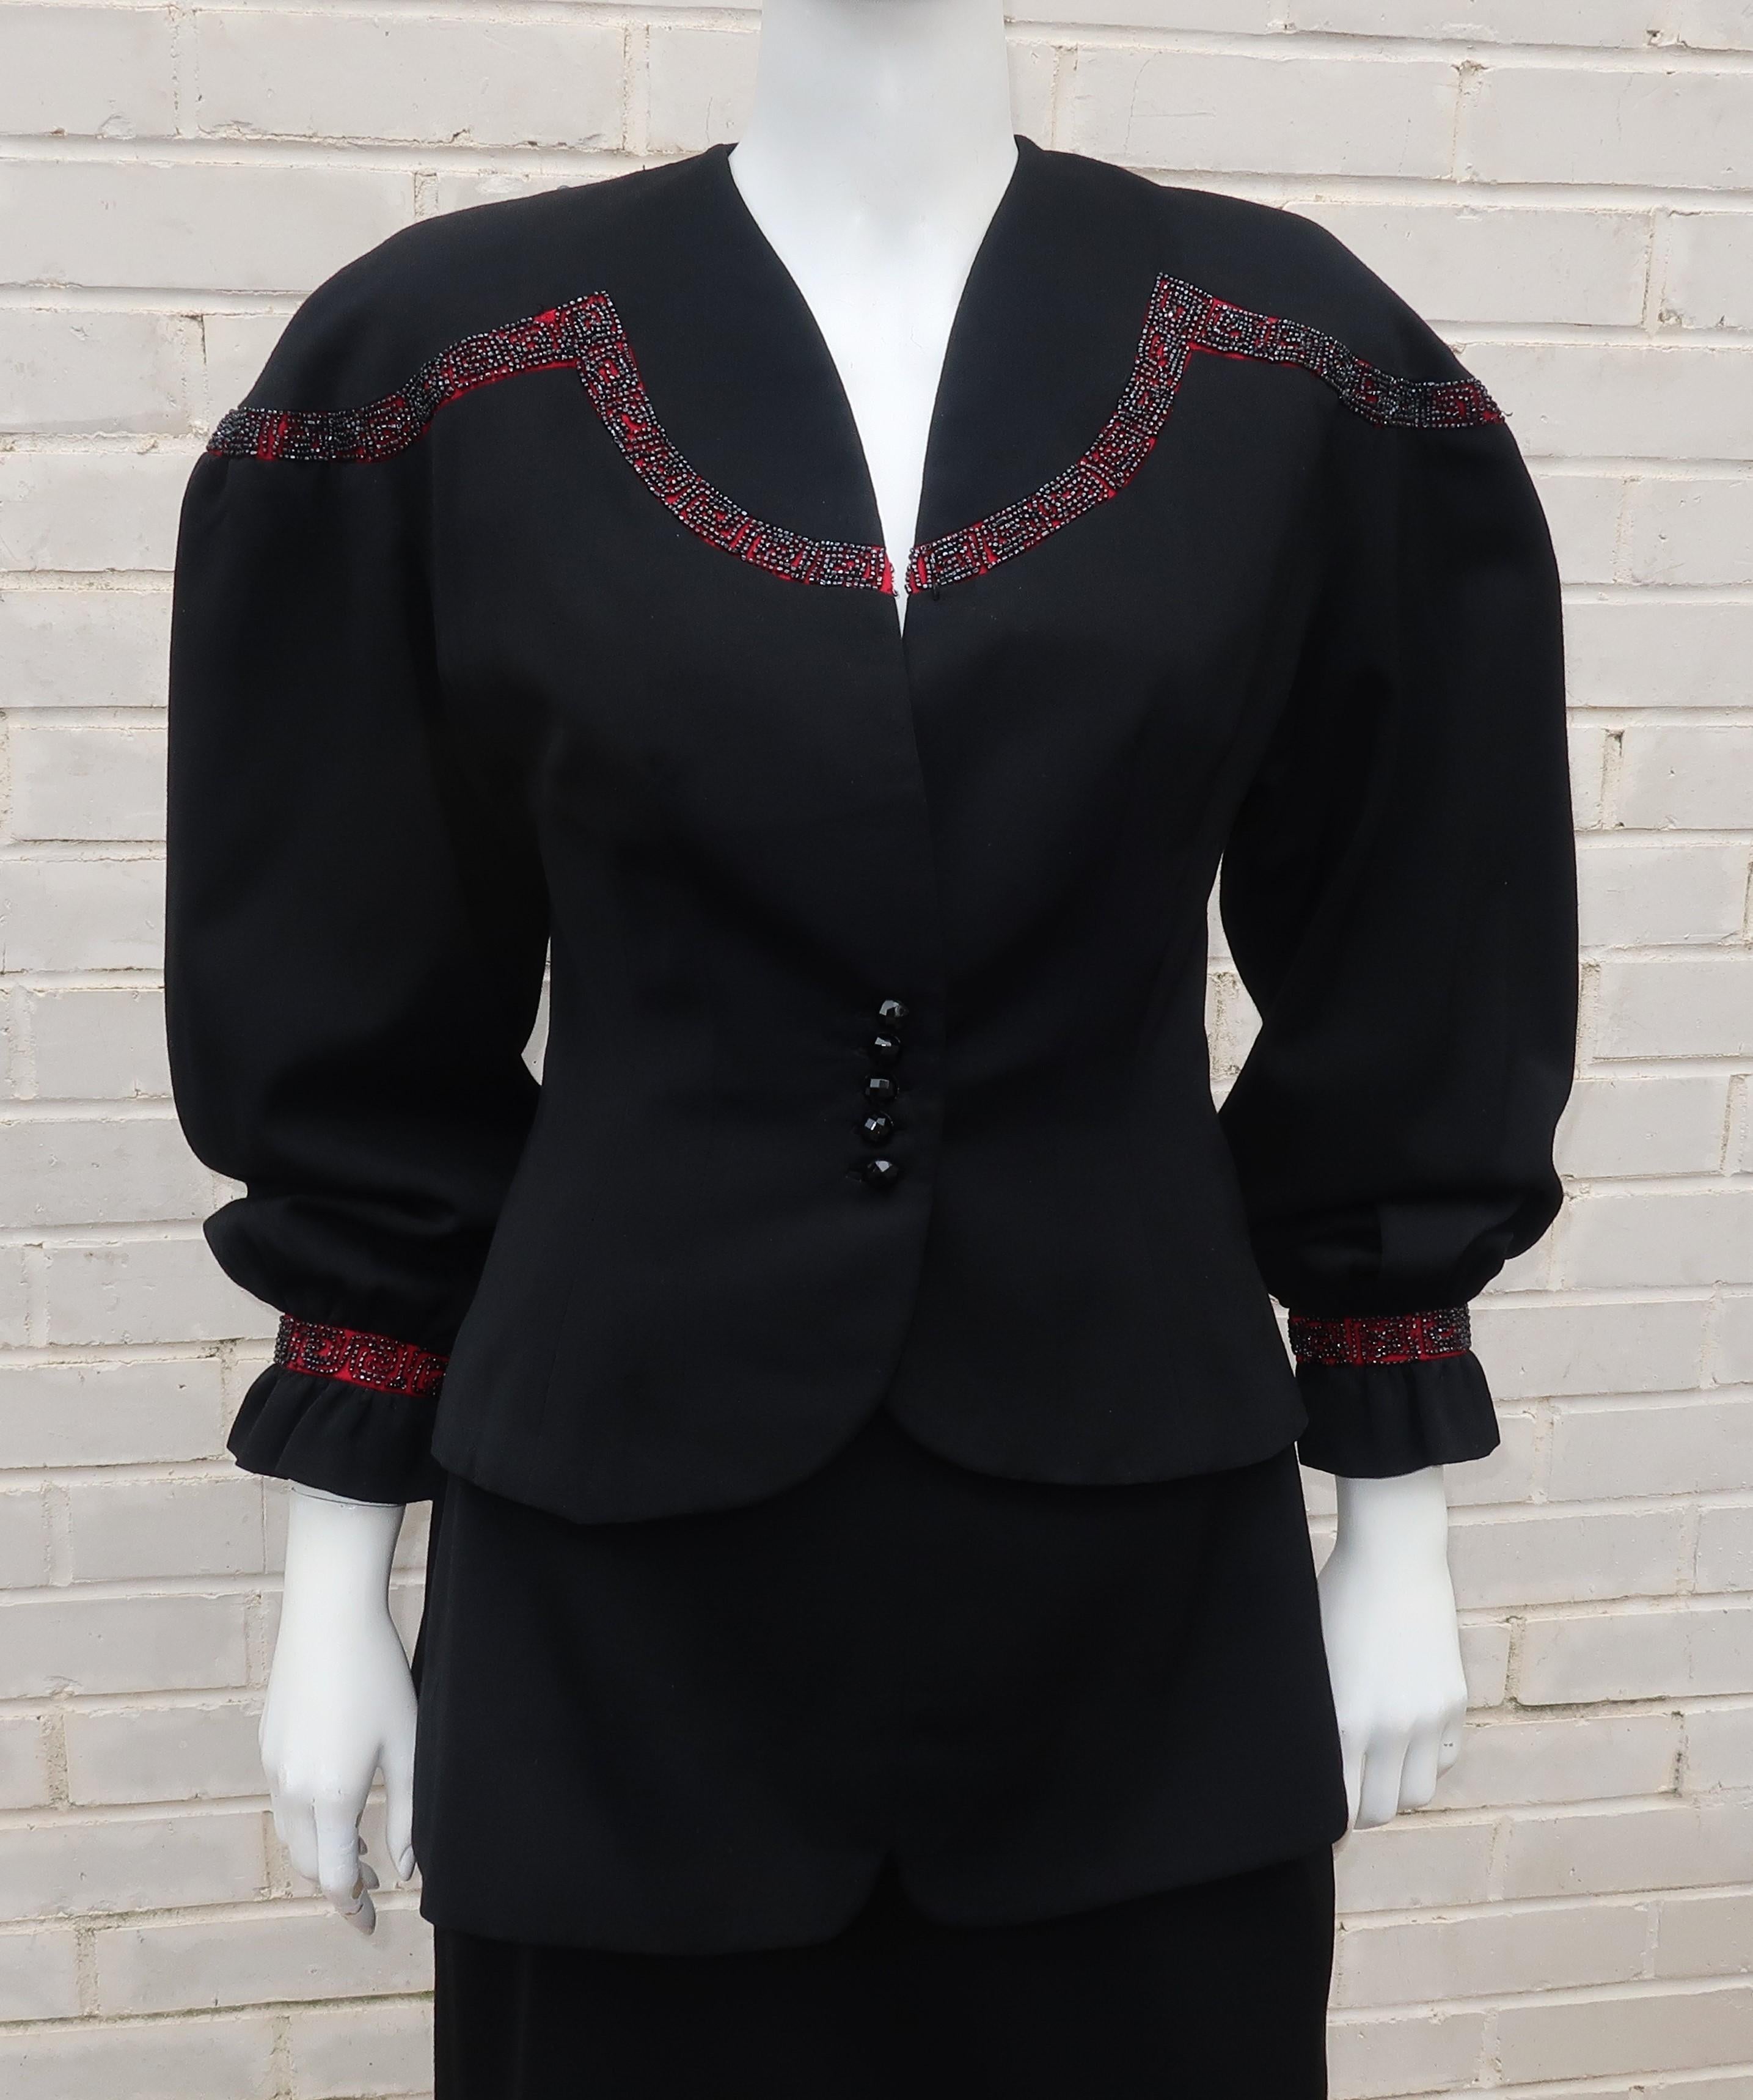 This 1940's black gabardine wool suit by Charles Kupersmith, a Chicago Illinois clothier, has drama one would expect from a Joan Crawford era look with a charming nod to Victorian design elements.  The jacket has beautiful balloon sleeves with snaps